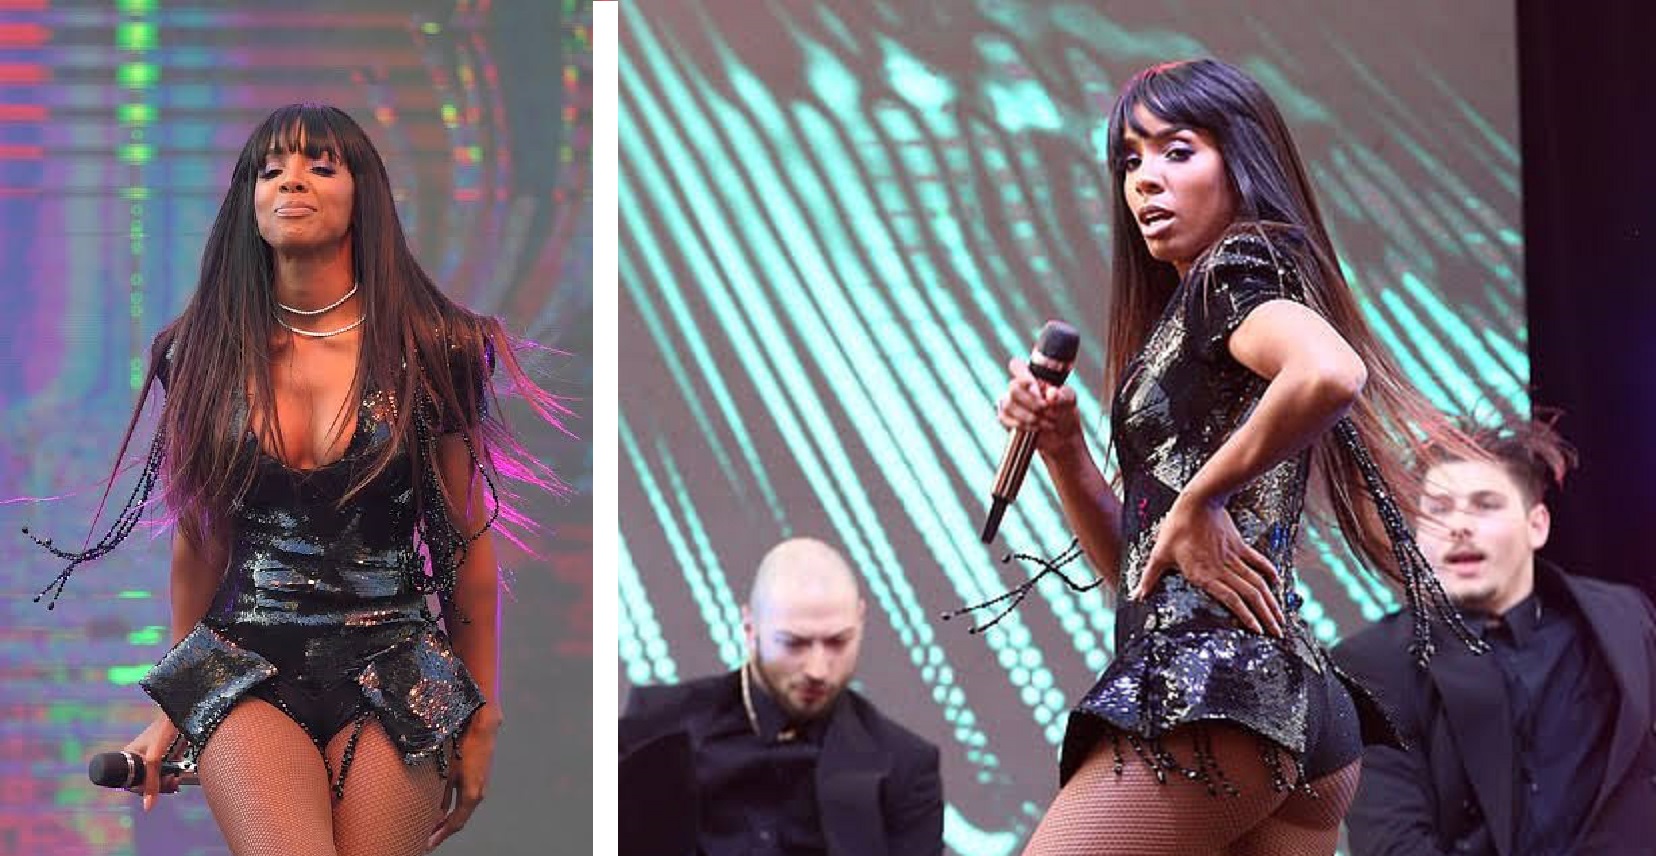 Watch: Kelly Rowland Performs ‘Bootylicious’ in Sydney, Despite Protests From Animals Rights Activists